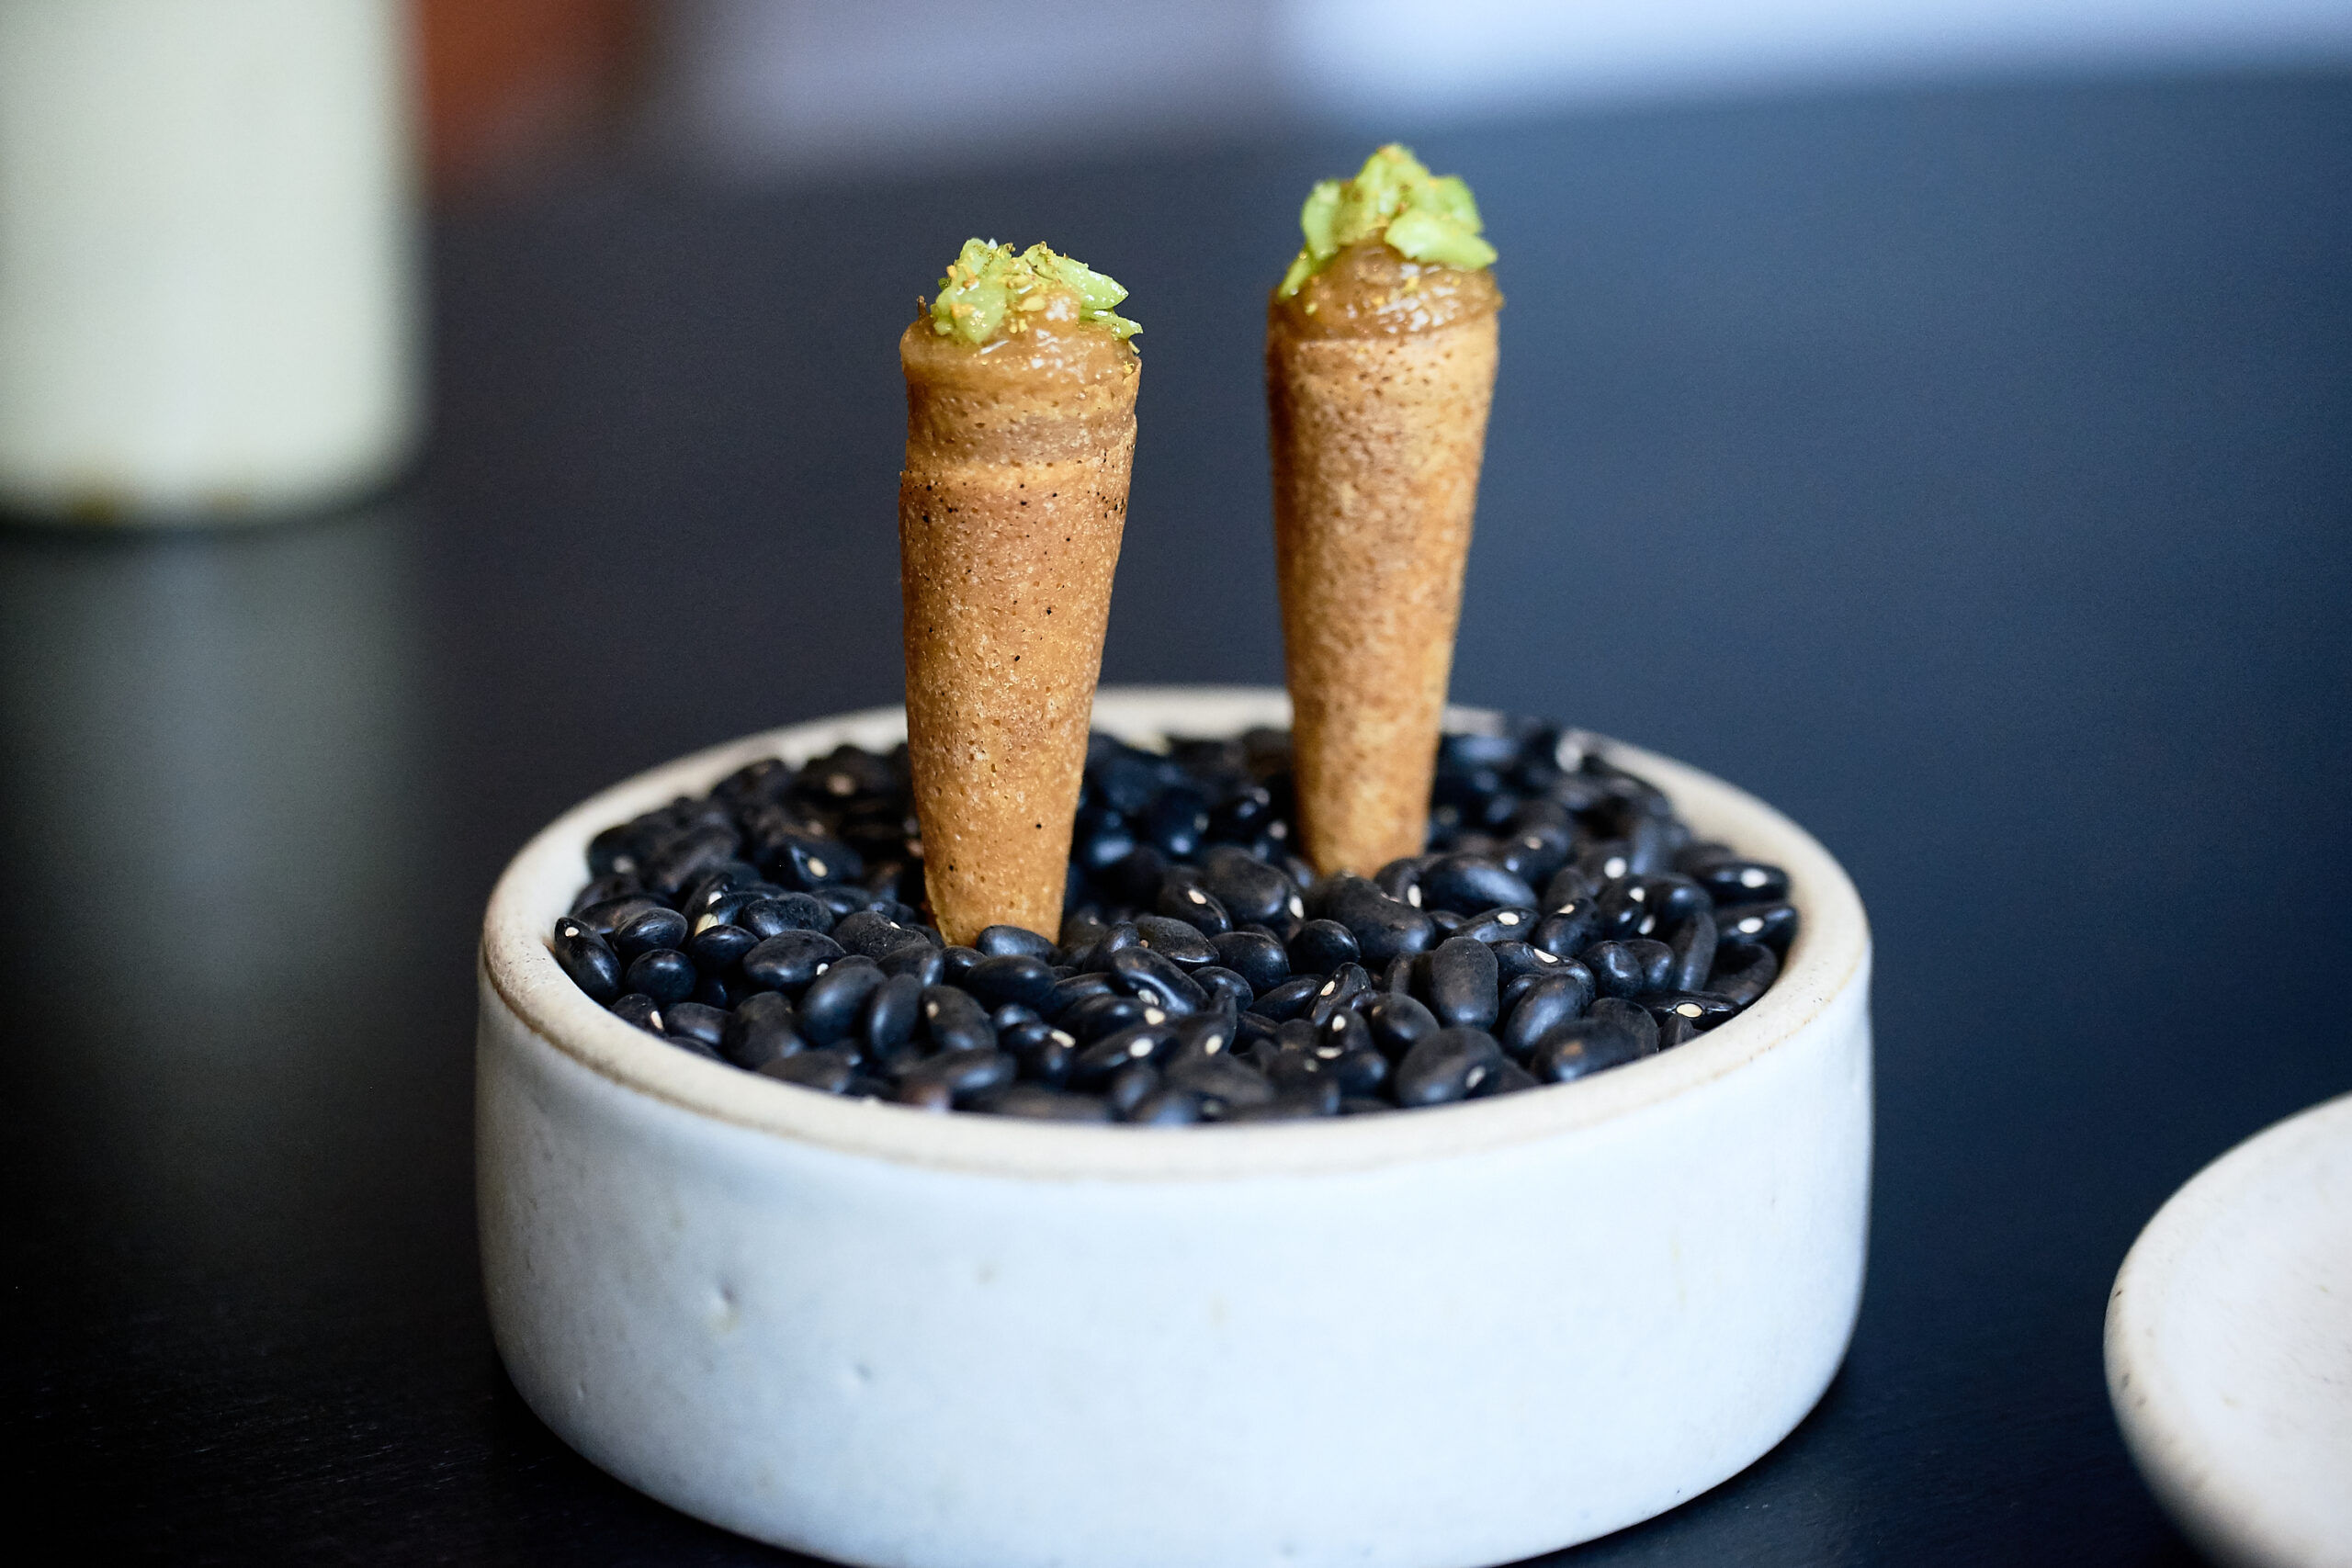 Crispy pancake cones with a cheese mousse and fennel jam displayed on dried black beans in a white ceramic dish.